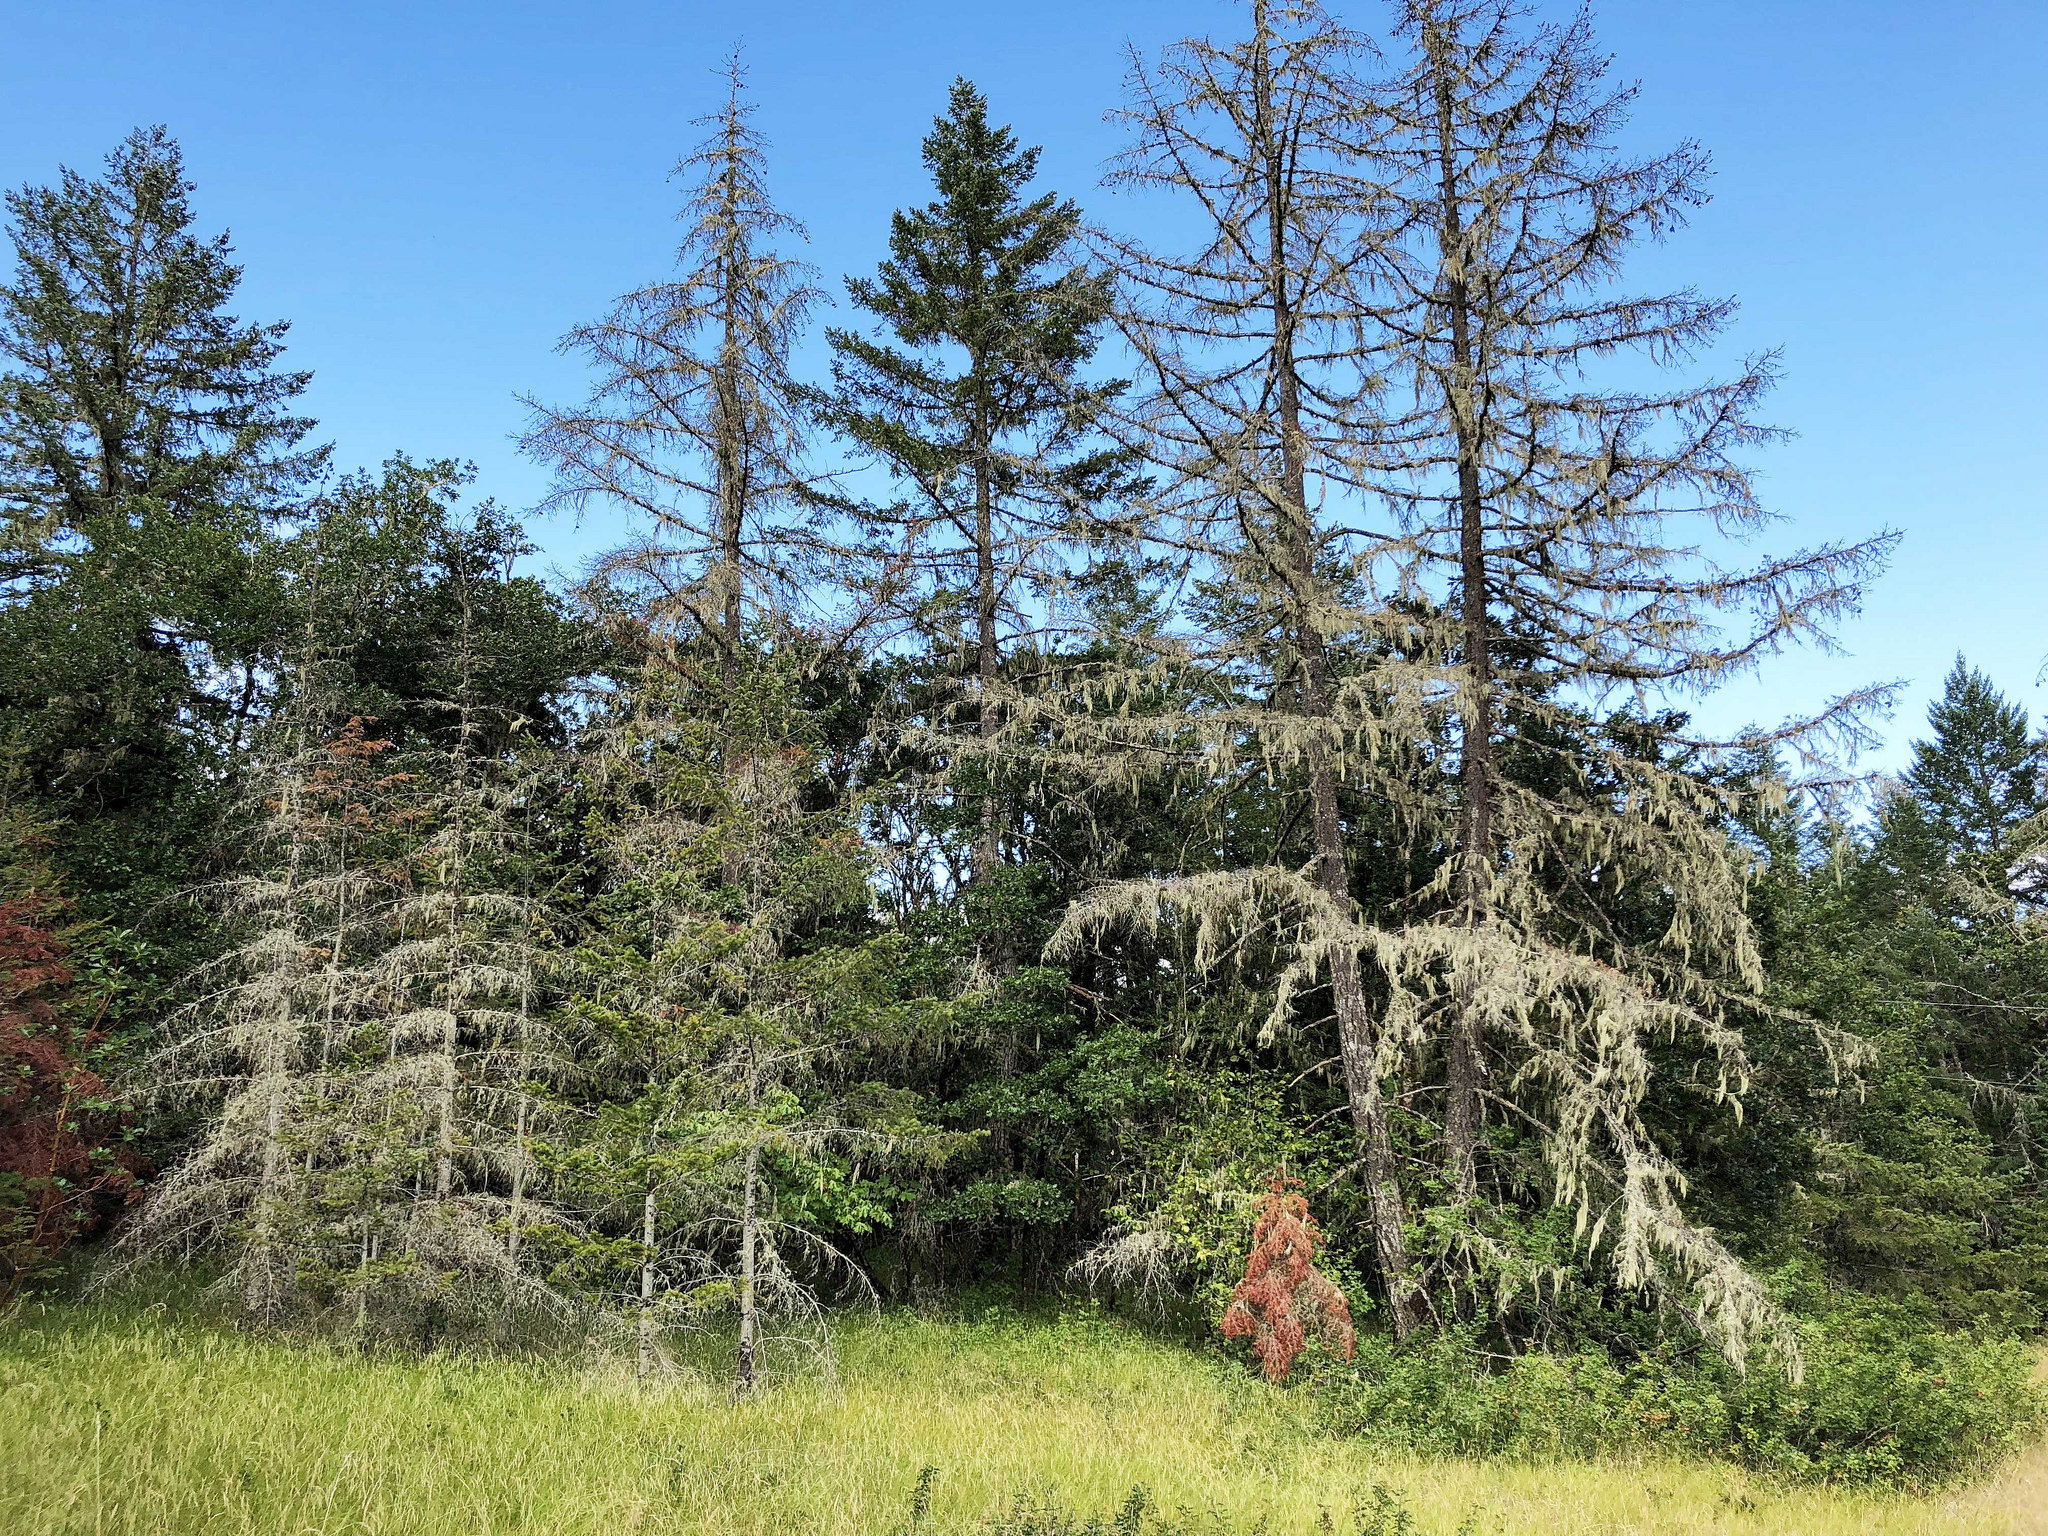 Conifers – especially Doug-firs – are suffering from drought